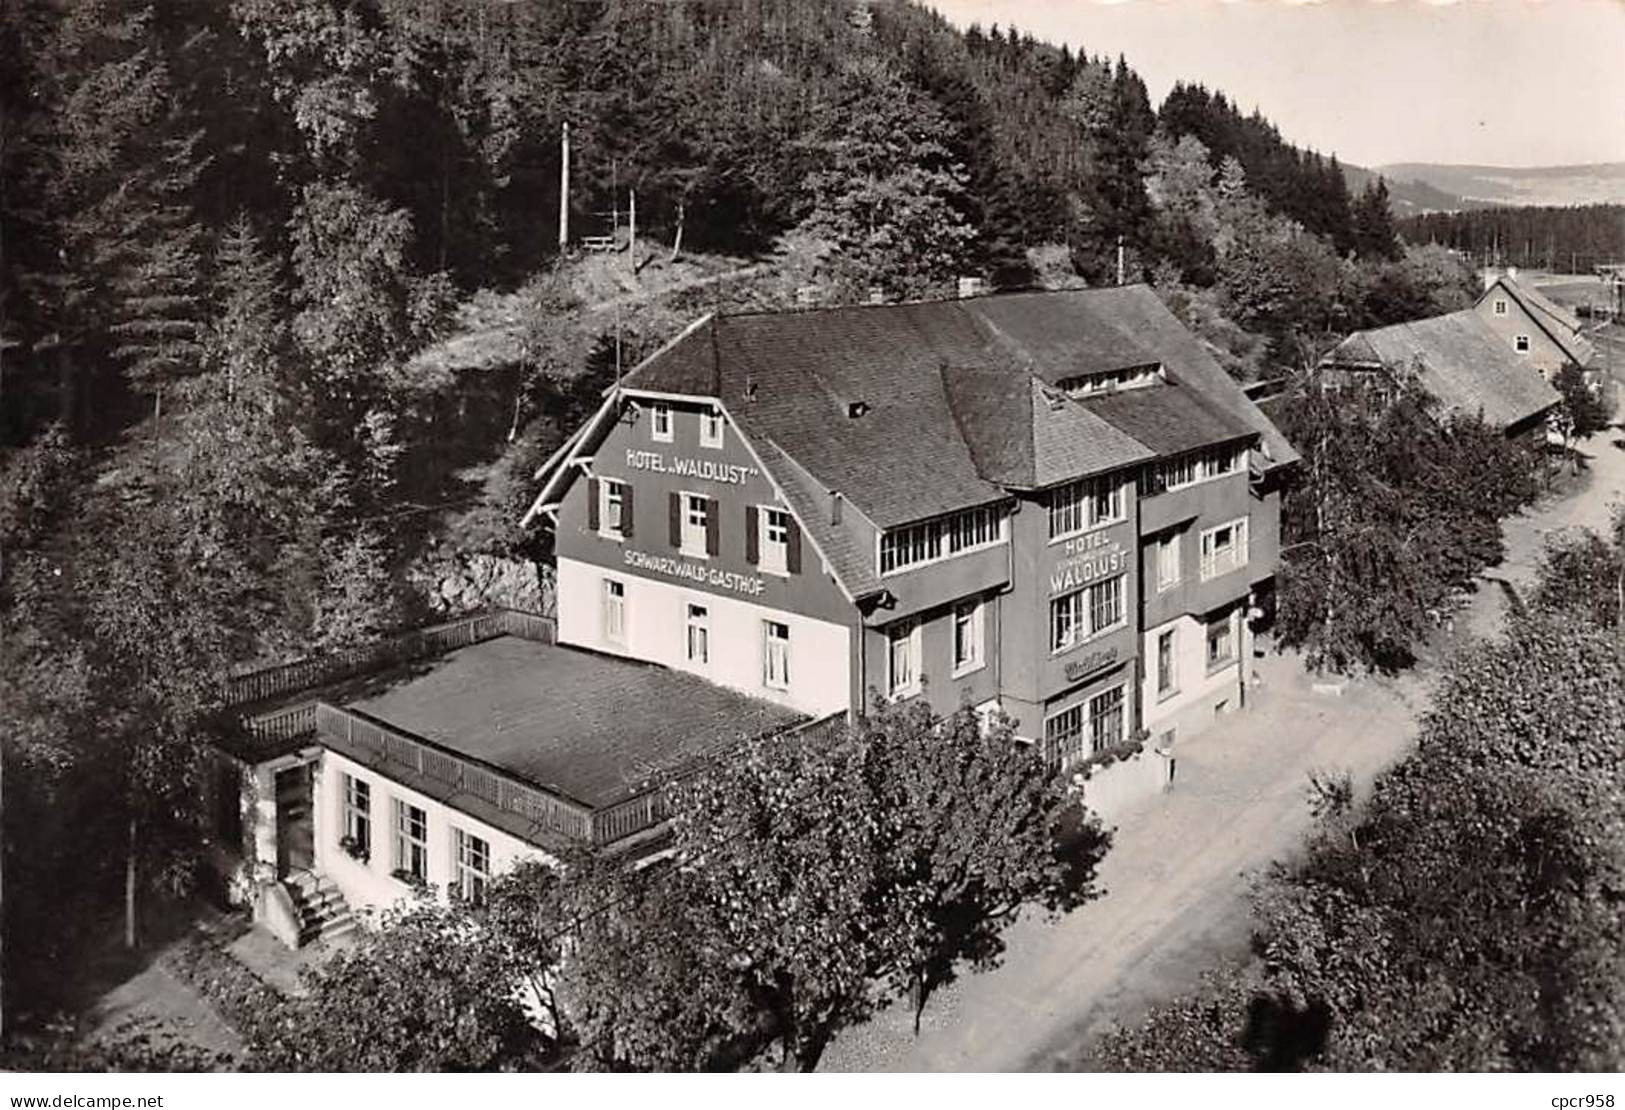 ALLEMAGNE - TITISEE - SAN39228 - Hotel Waldfust - CPSM 14x9 Cm - Titisee-Neustadt